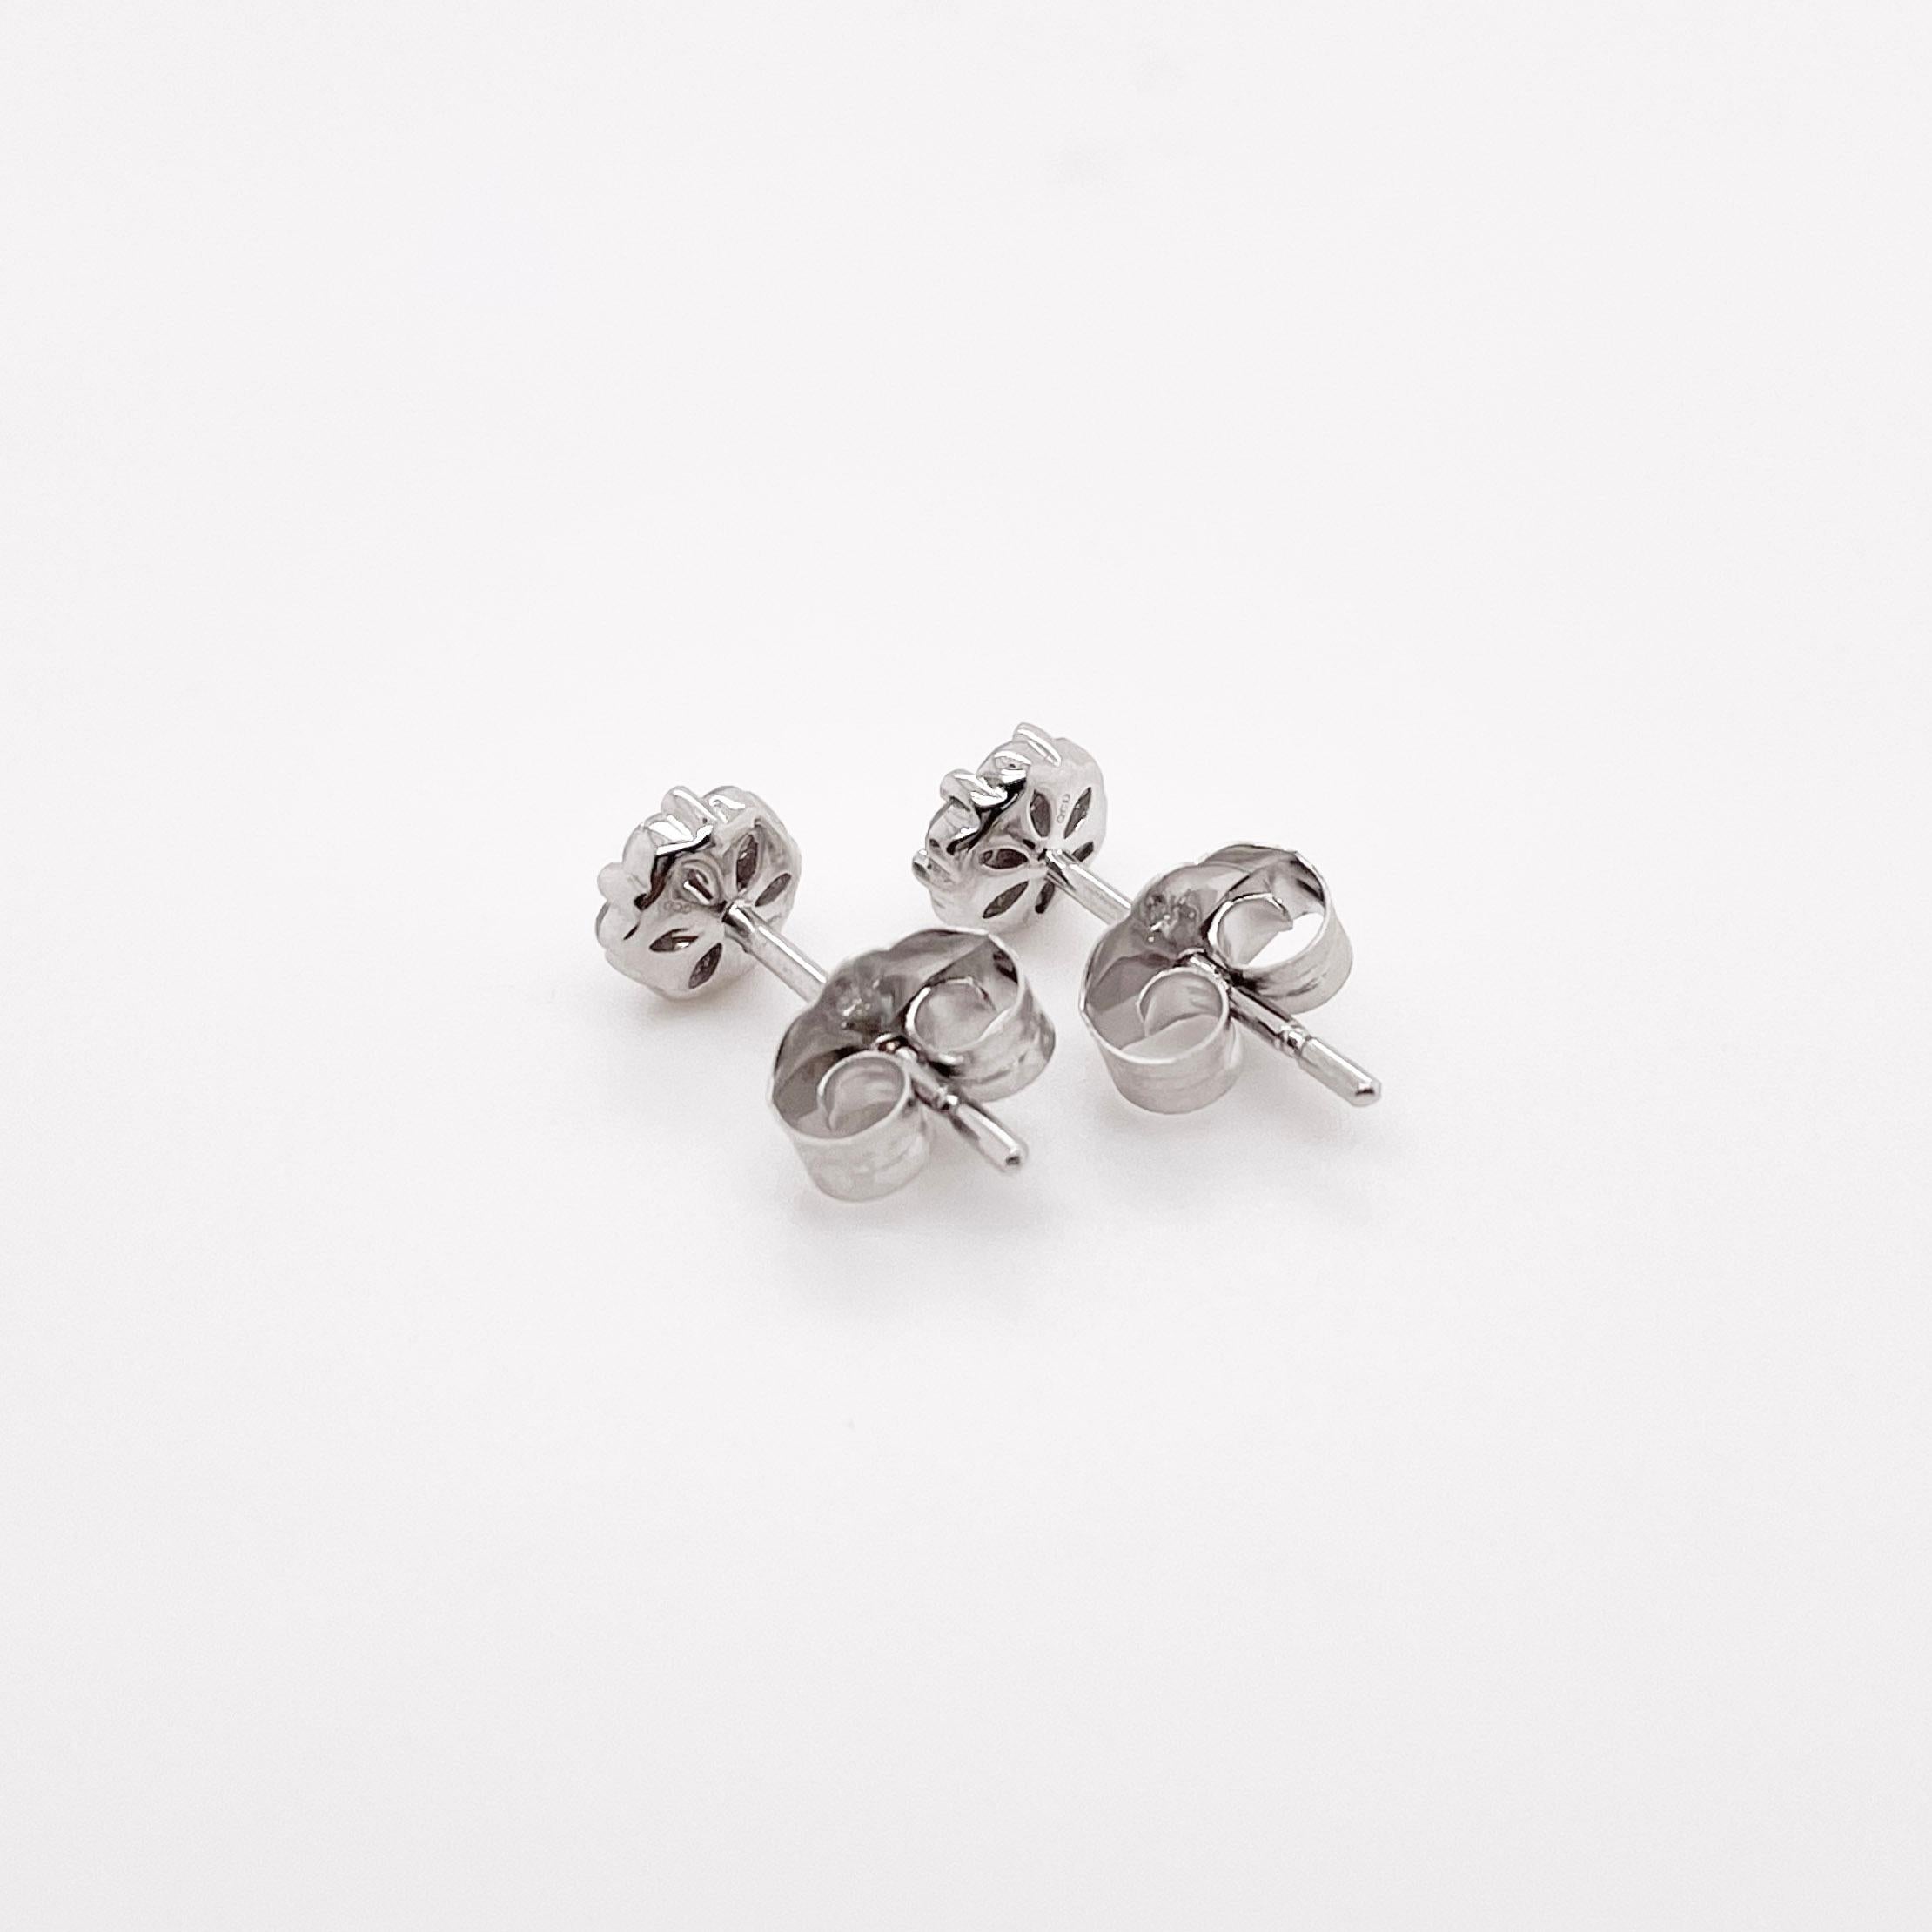 Round Cut Diamond Floral Cluster Studs, 14K White Gold, 4.5-5mm, 1/4 Carat Total  For Sale